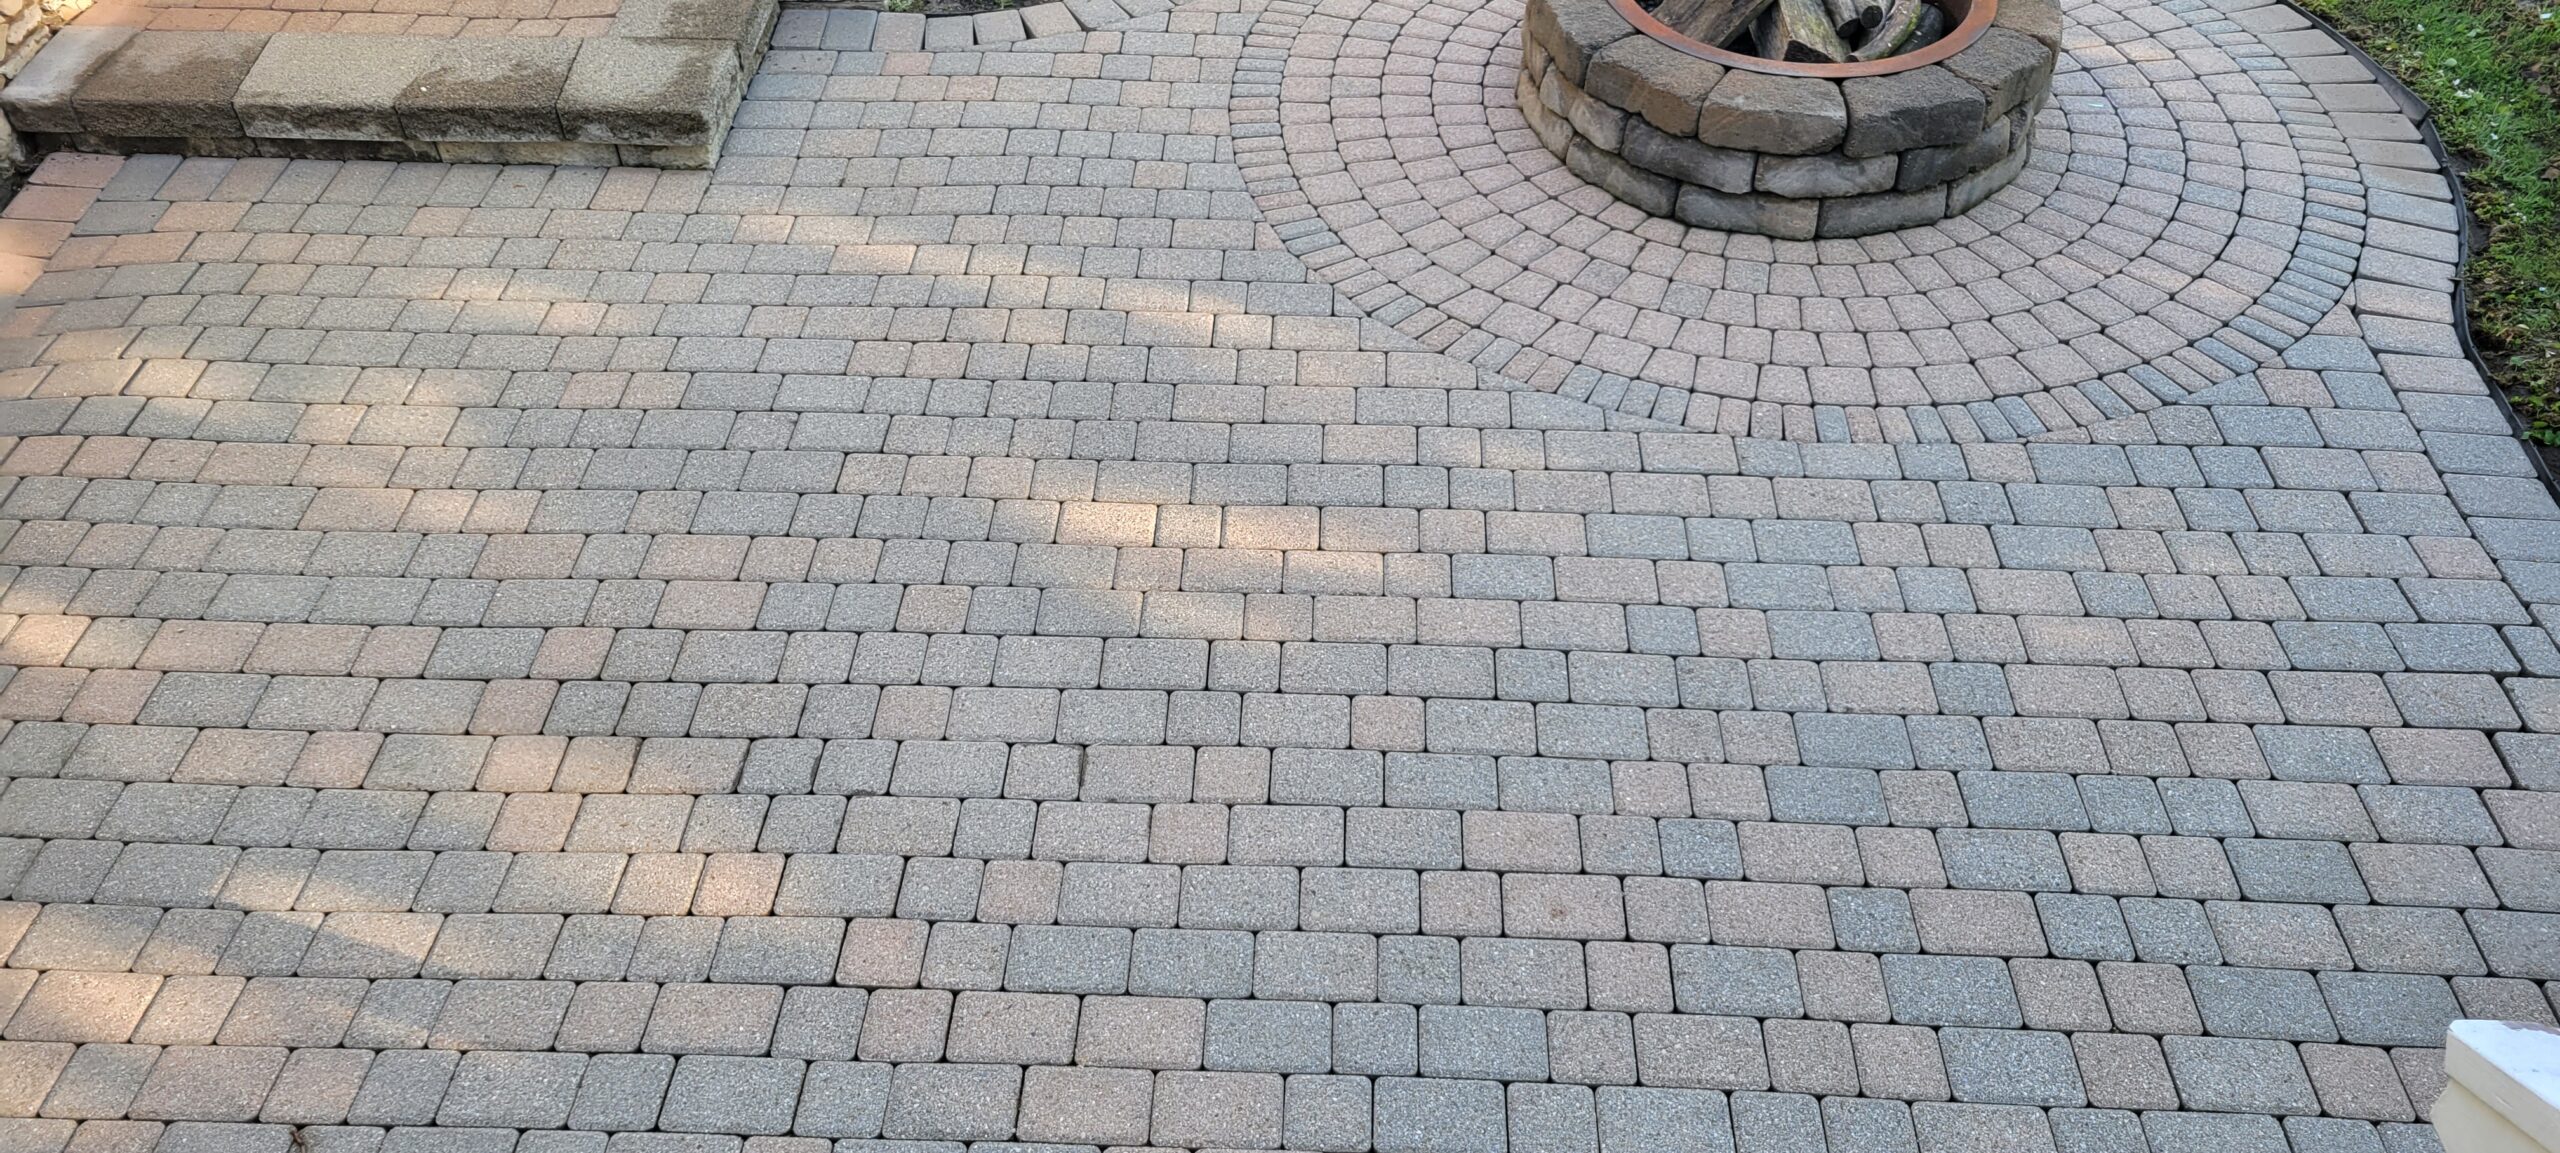 Patio pavers looking refreshed post-power wash, free of moss and dirt